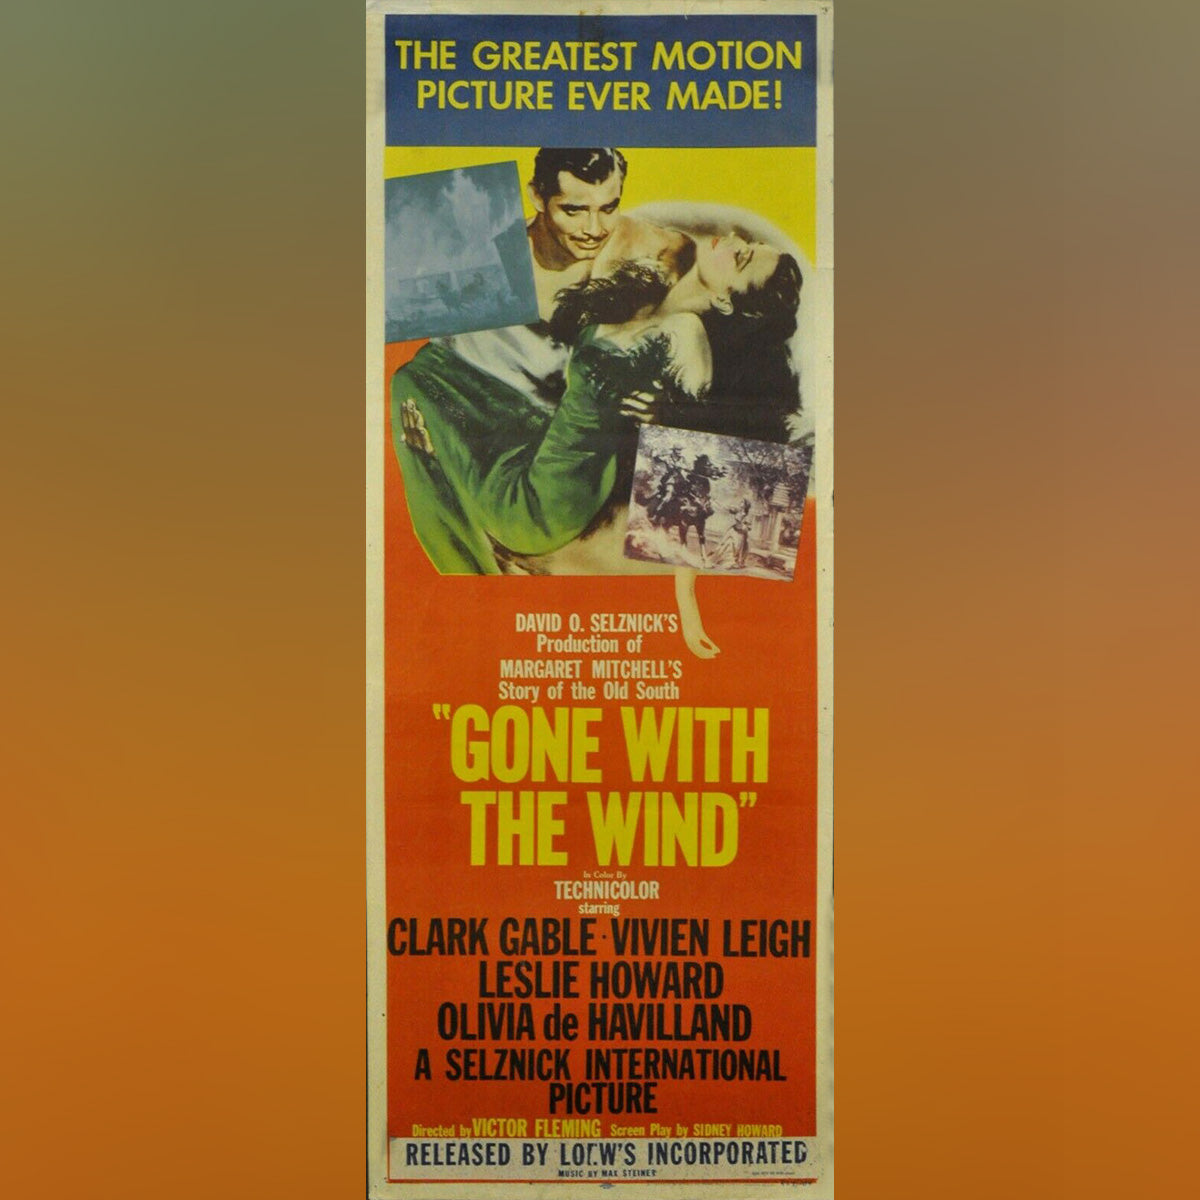 Original Movie Poster of Gone With The Wind (1954R)